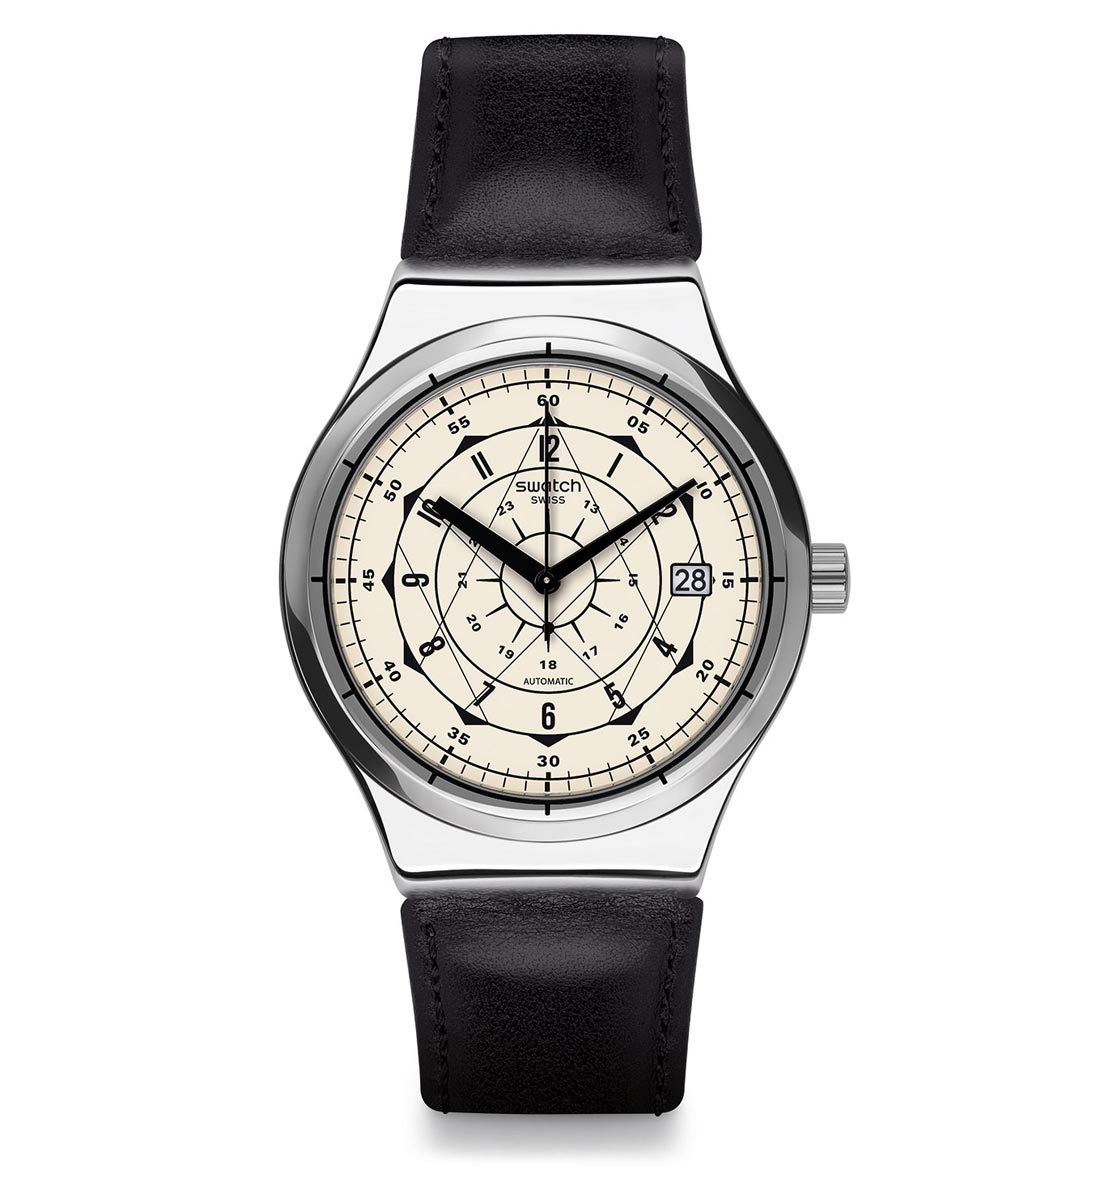 Swatch - Irony Sistem51, Winter 2016 new releases | Time and Watches ...